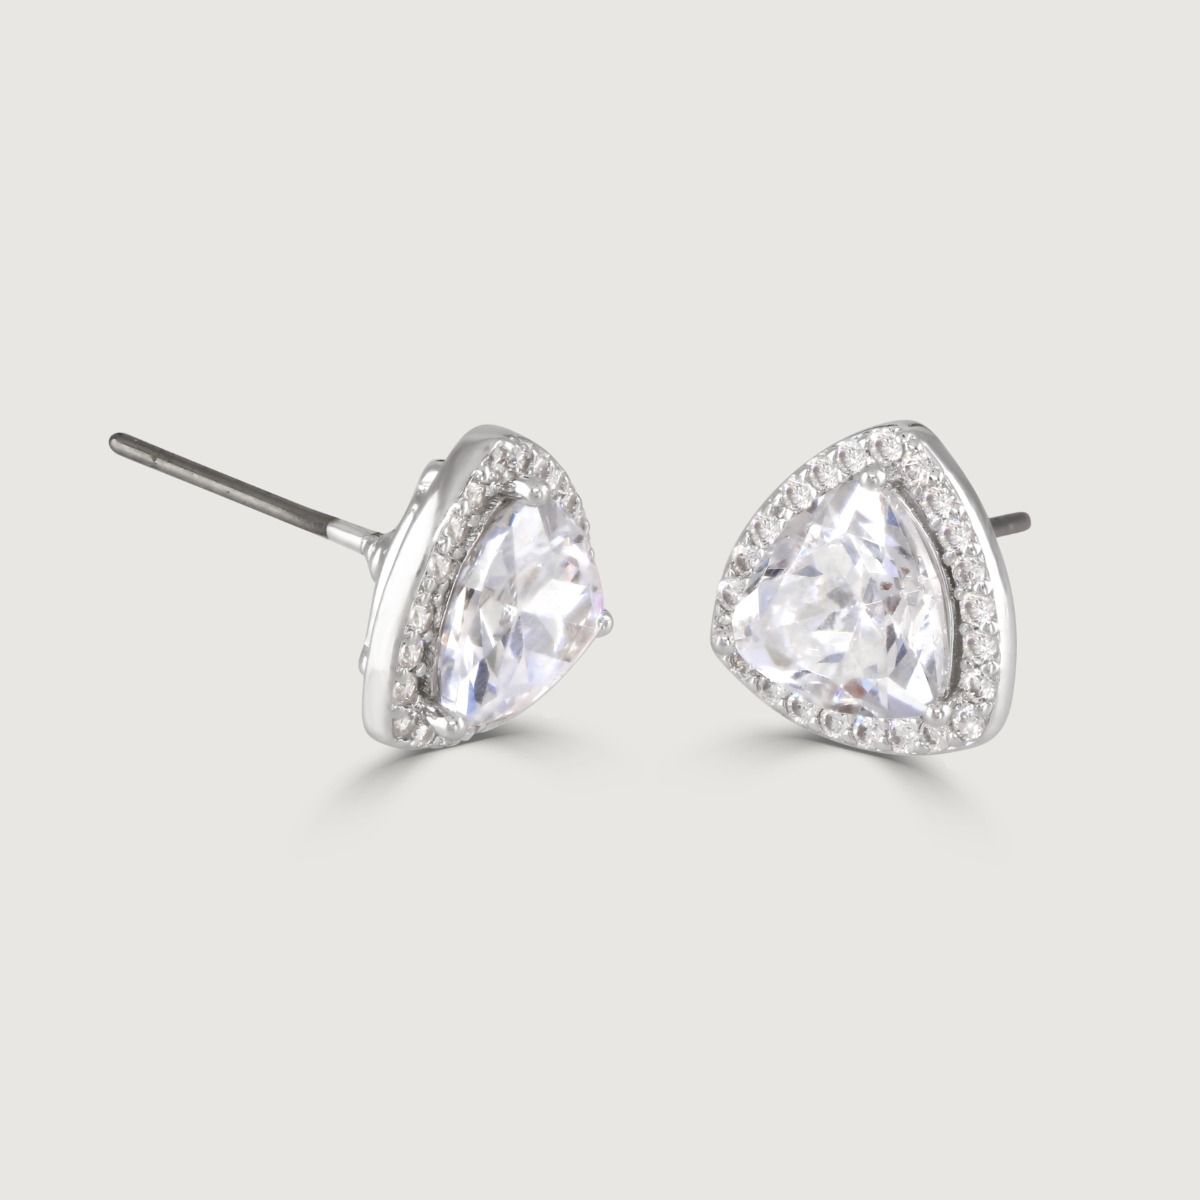 These dazzling stud earrings are set with a halo of flawlessly cut cubic zirconia stones, surrounding a sparkling trillion cut clear centre stone. Wear to add timeless glamour to any look.